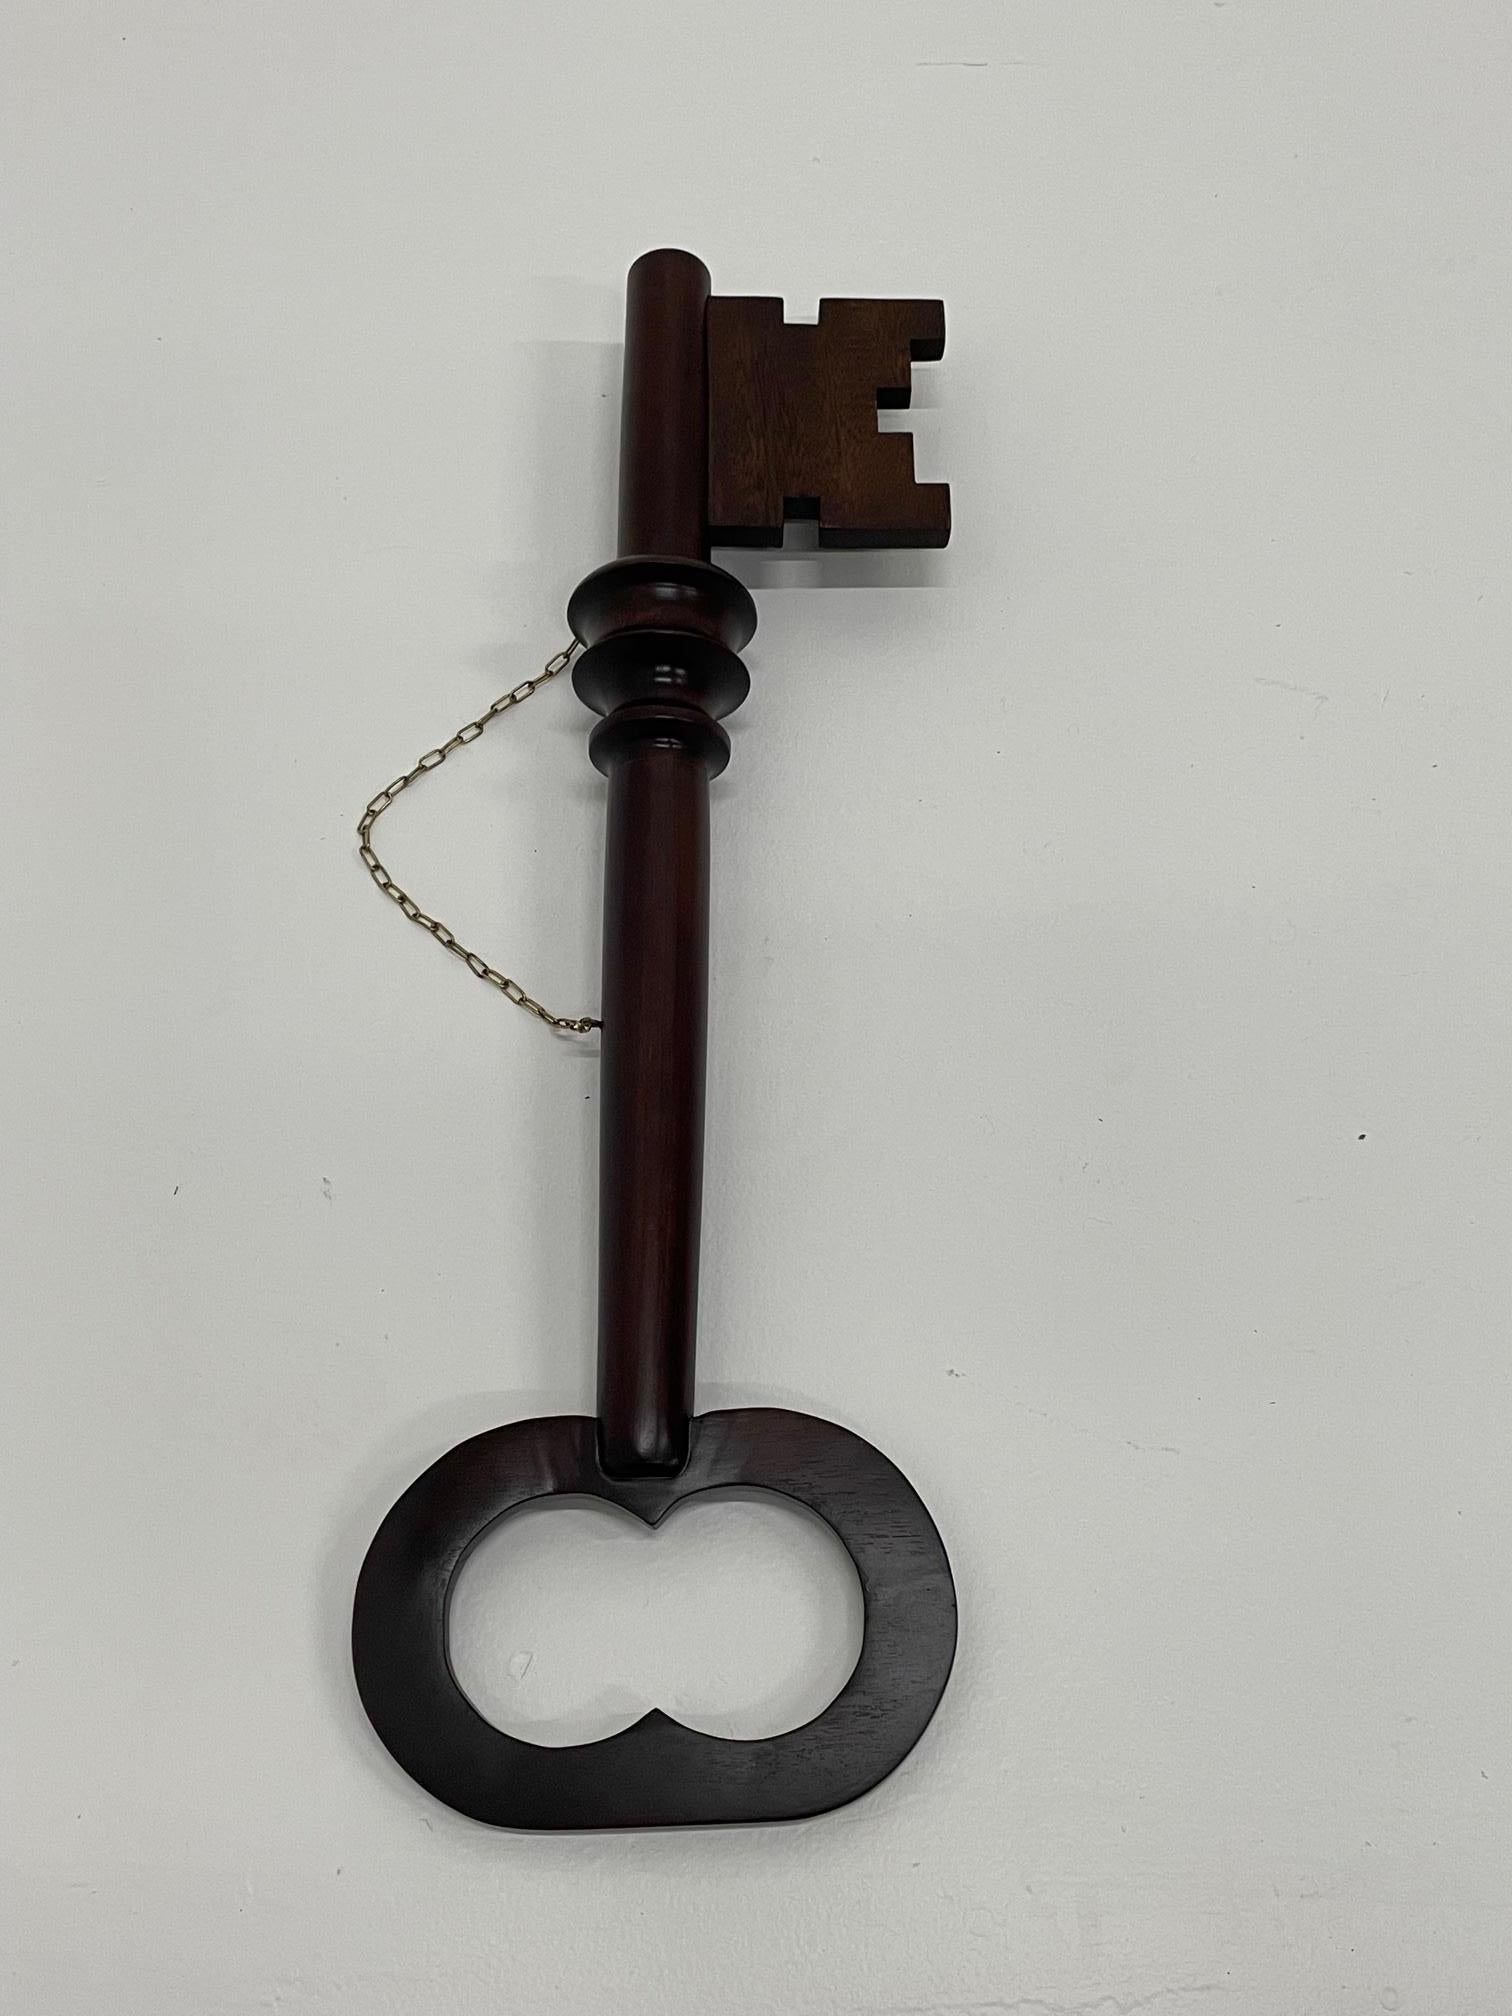 A wonderful early 20th century carved mahogany locksmith trade sign in the shape of a large key. Makes an unexpected piece of wall art as a found object with tons of character.